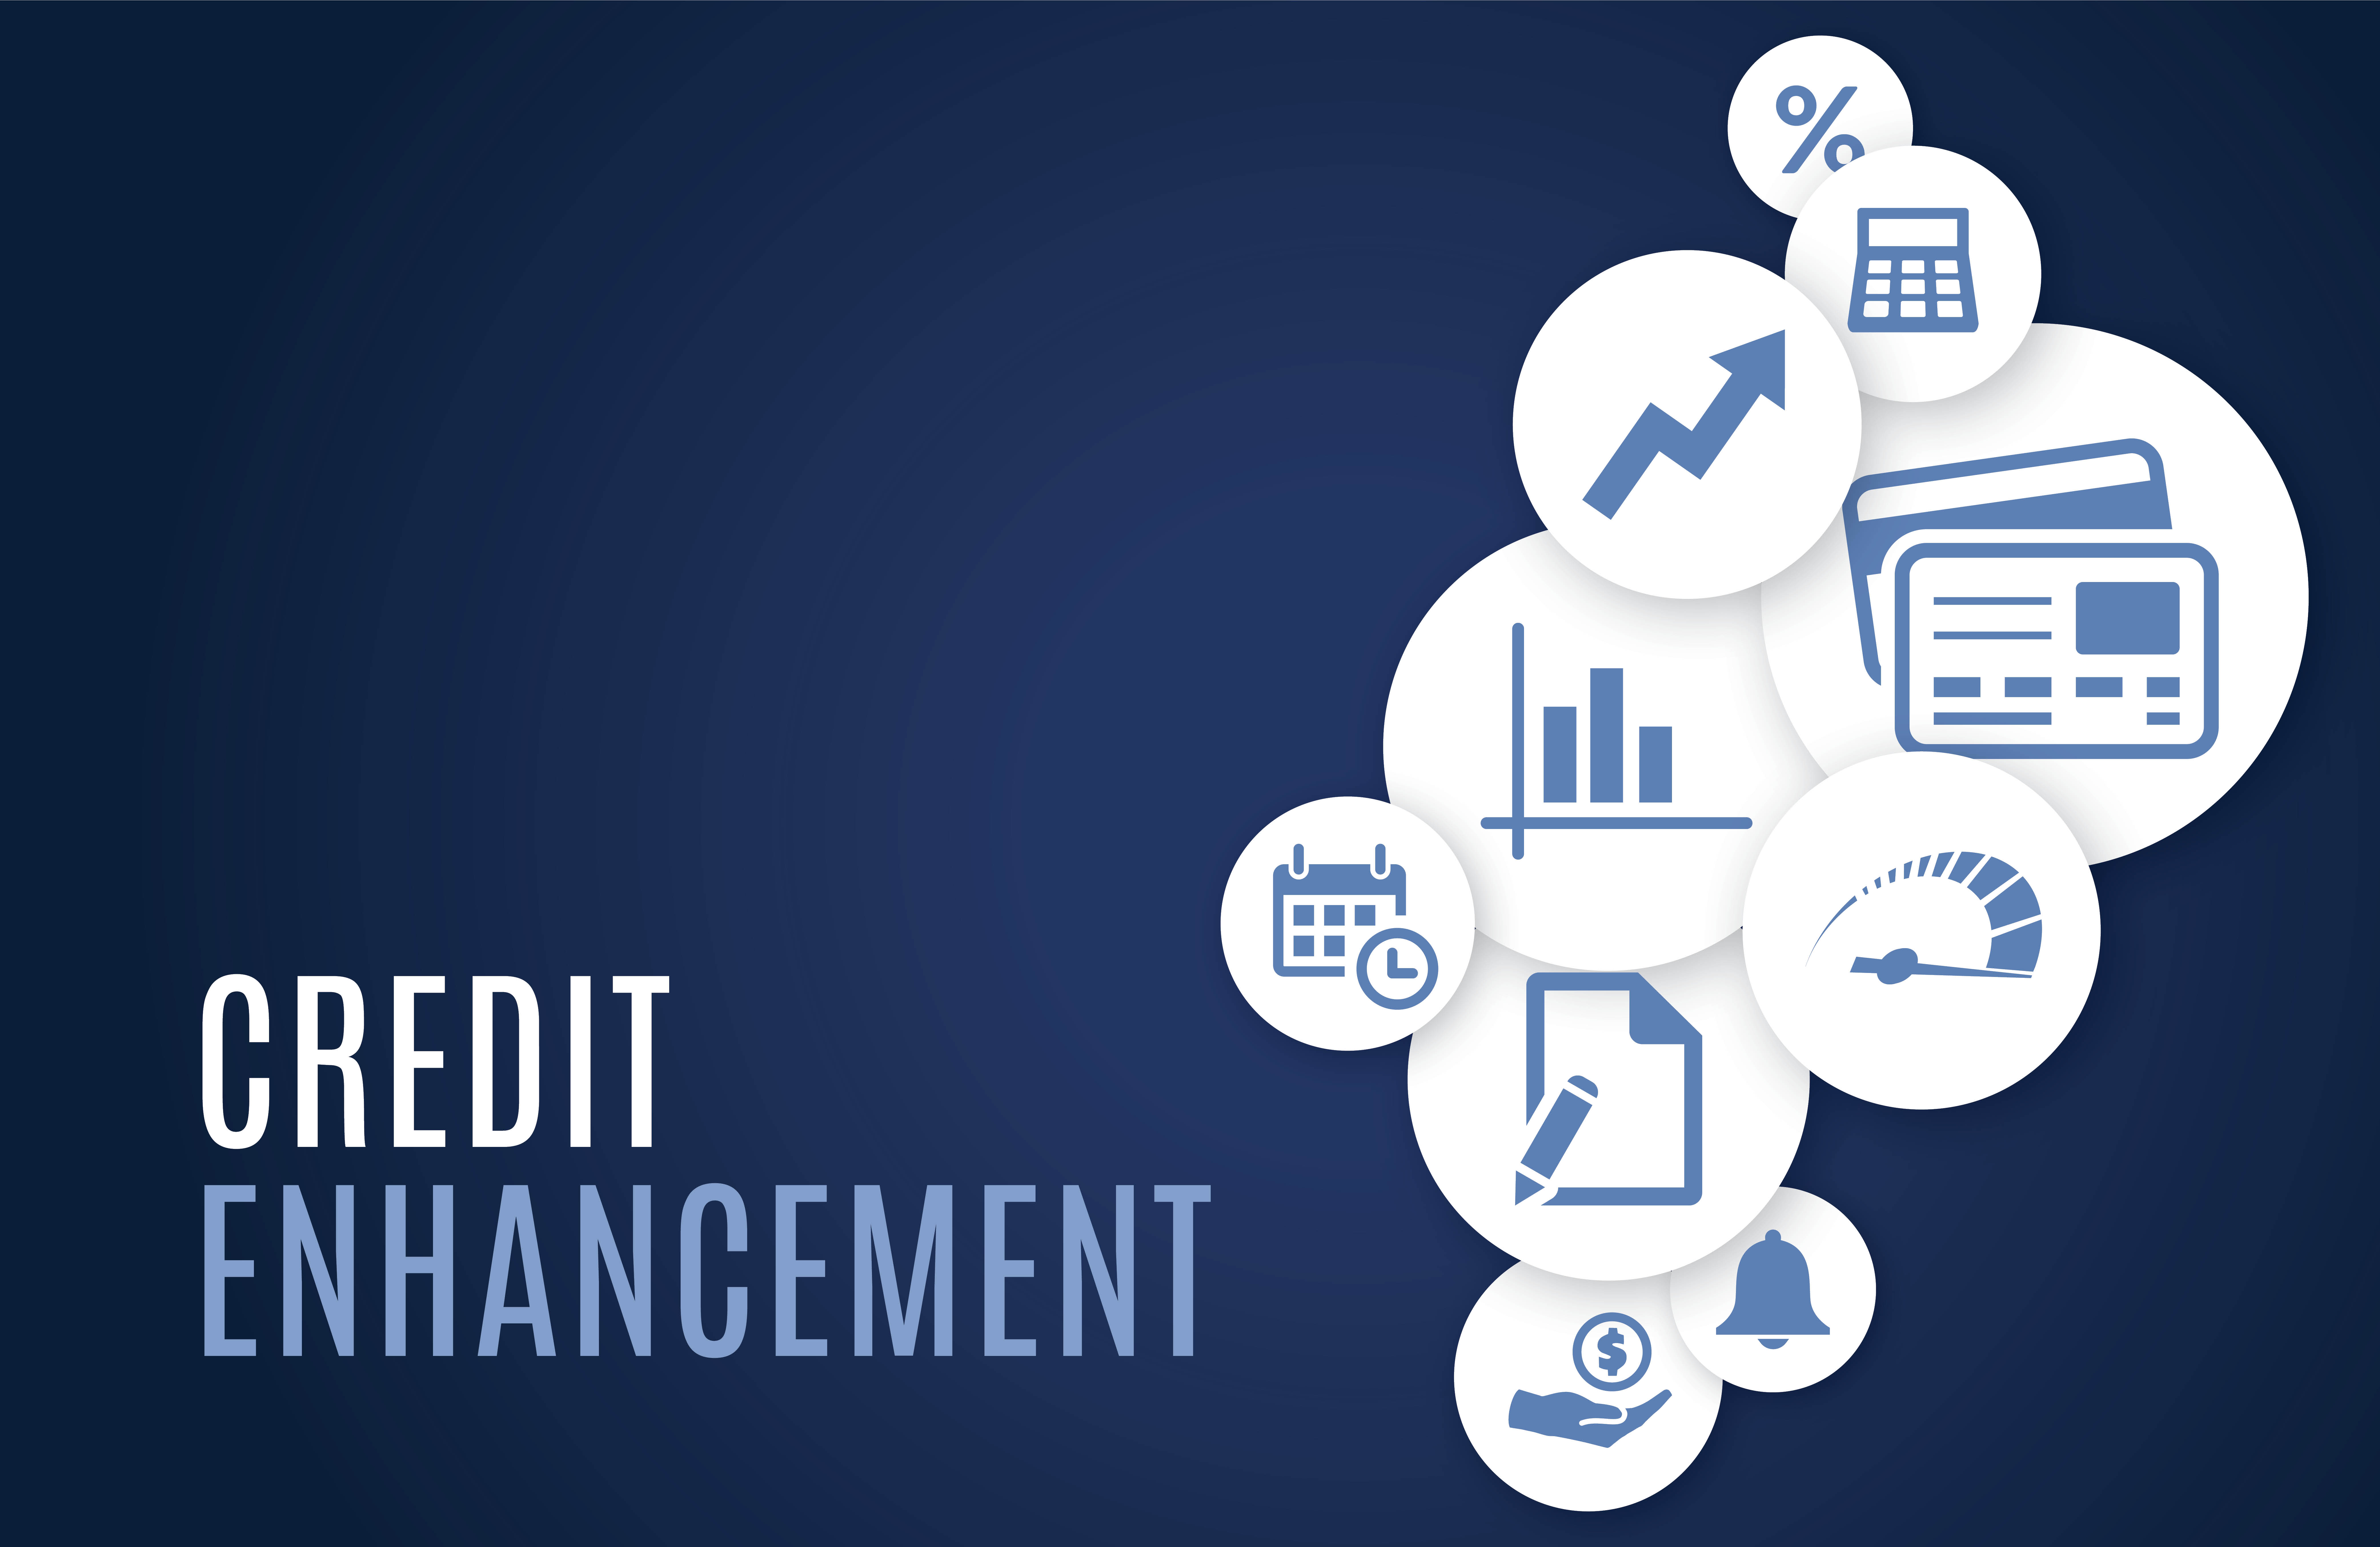 Learn about our Credit Enhancement Program